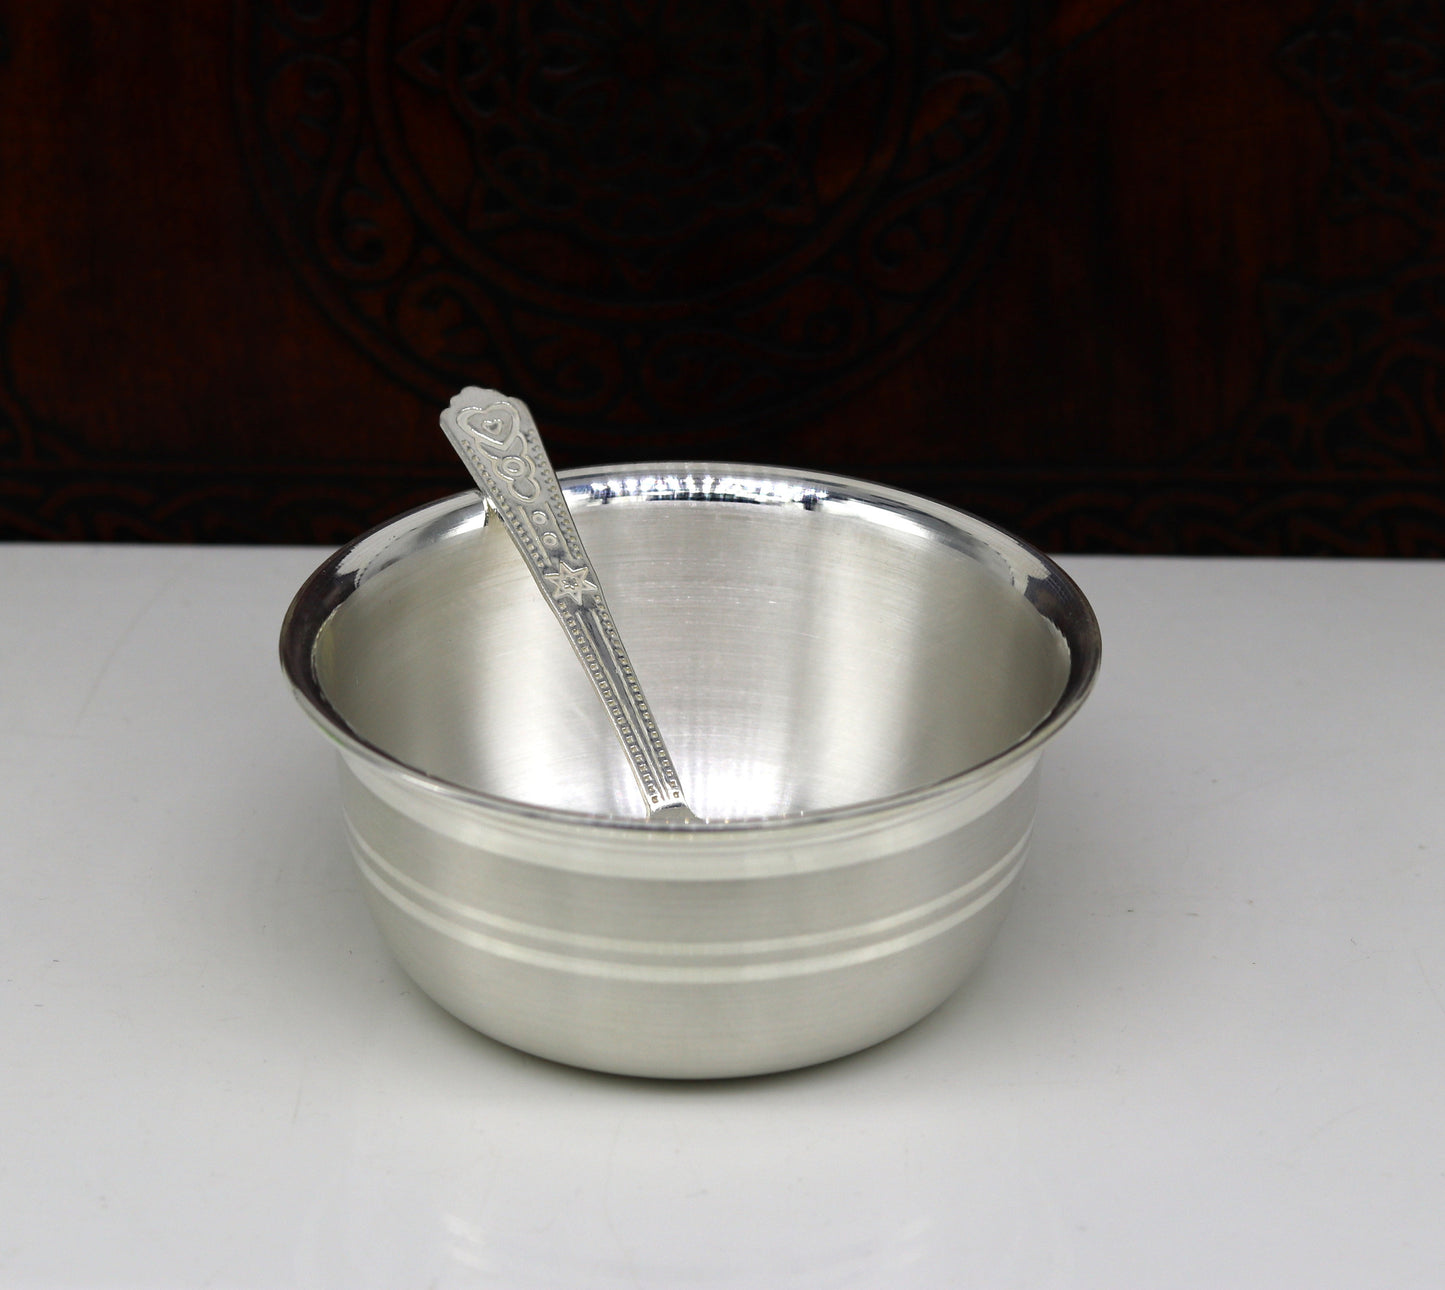 Exclusive 999 pure silver handmade solid bowl and spoon, healthy serving bowl, silver vessels, food serving utensils set, silver art sv83 - TRIBAL ORNAMENTS